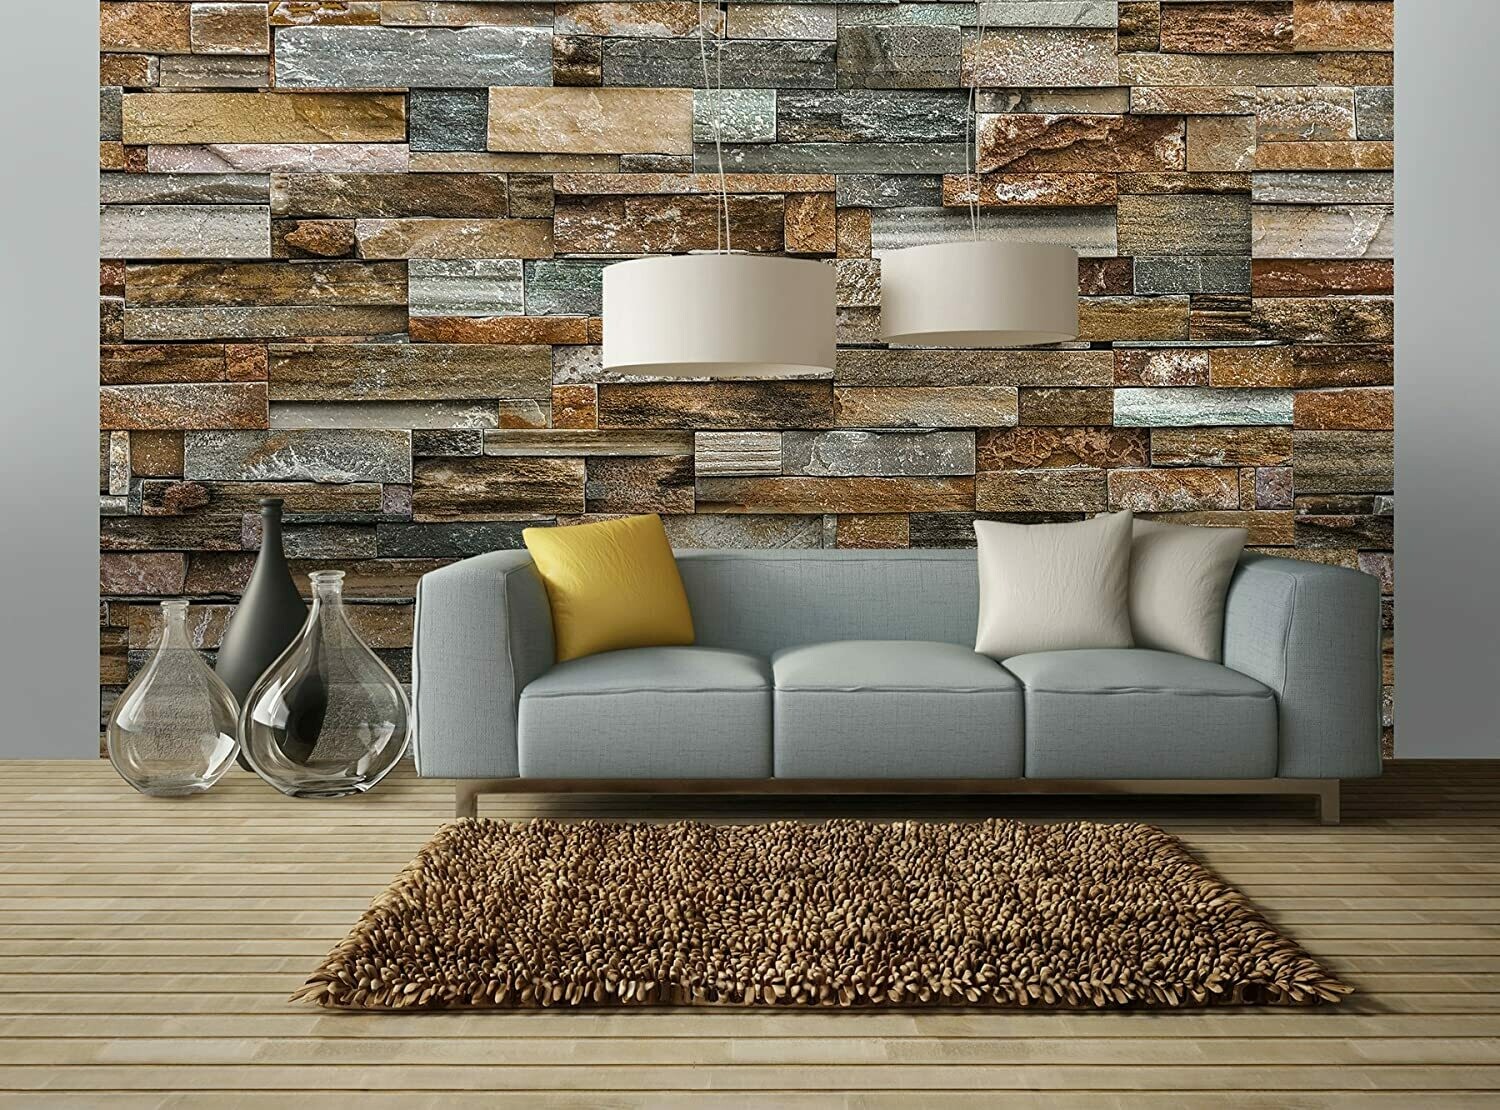 Colorful Stone Wall Wall Mural